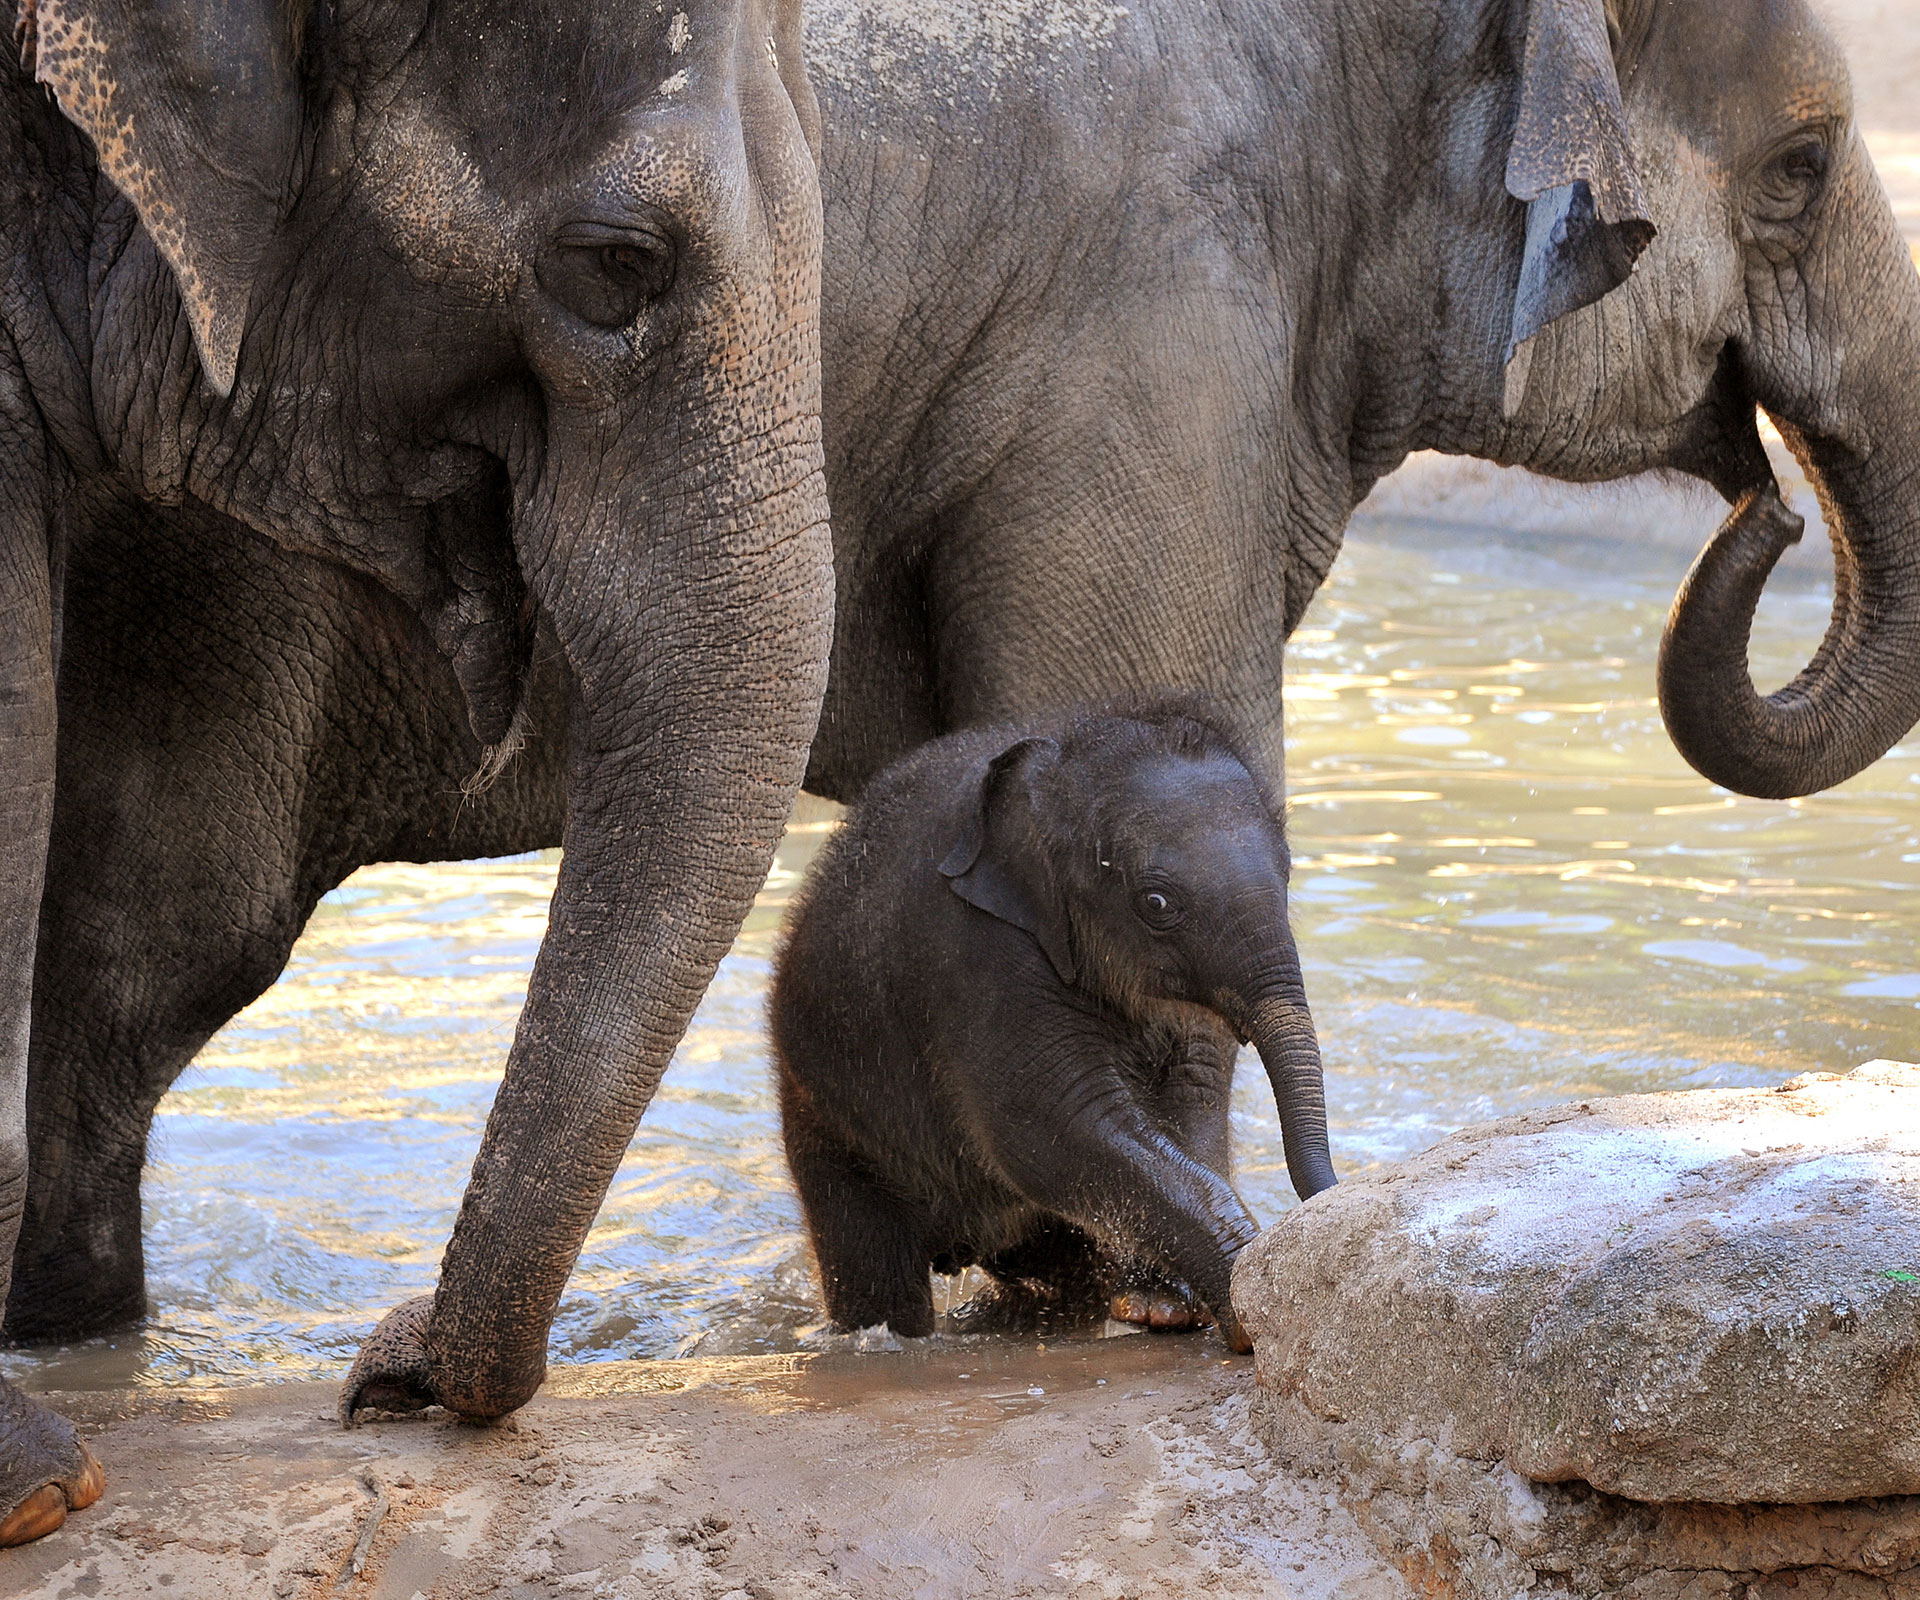 Melbourne Zoo’s baby elephant Willow has died